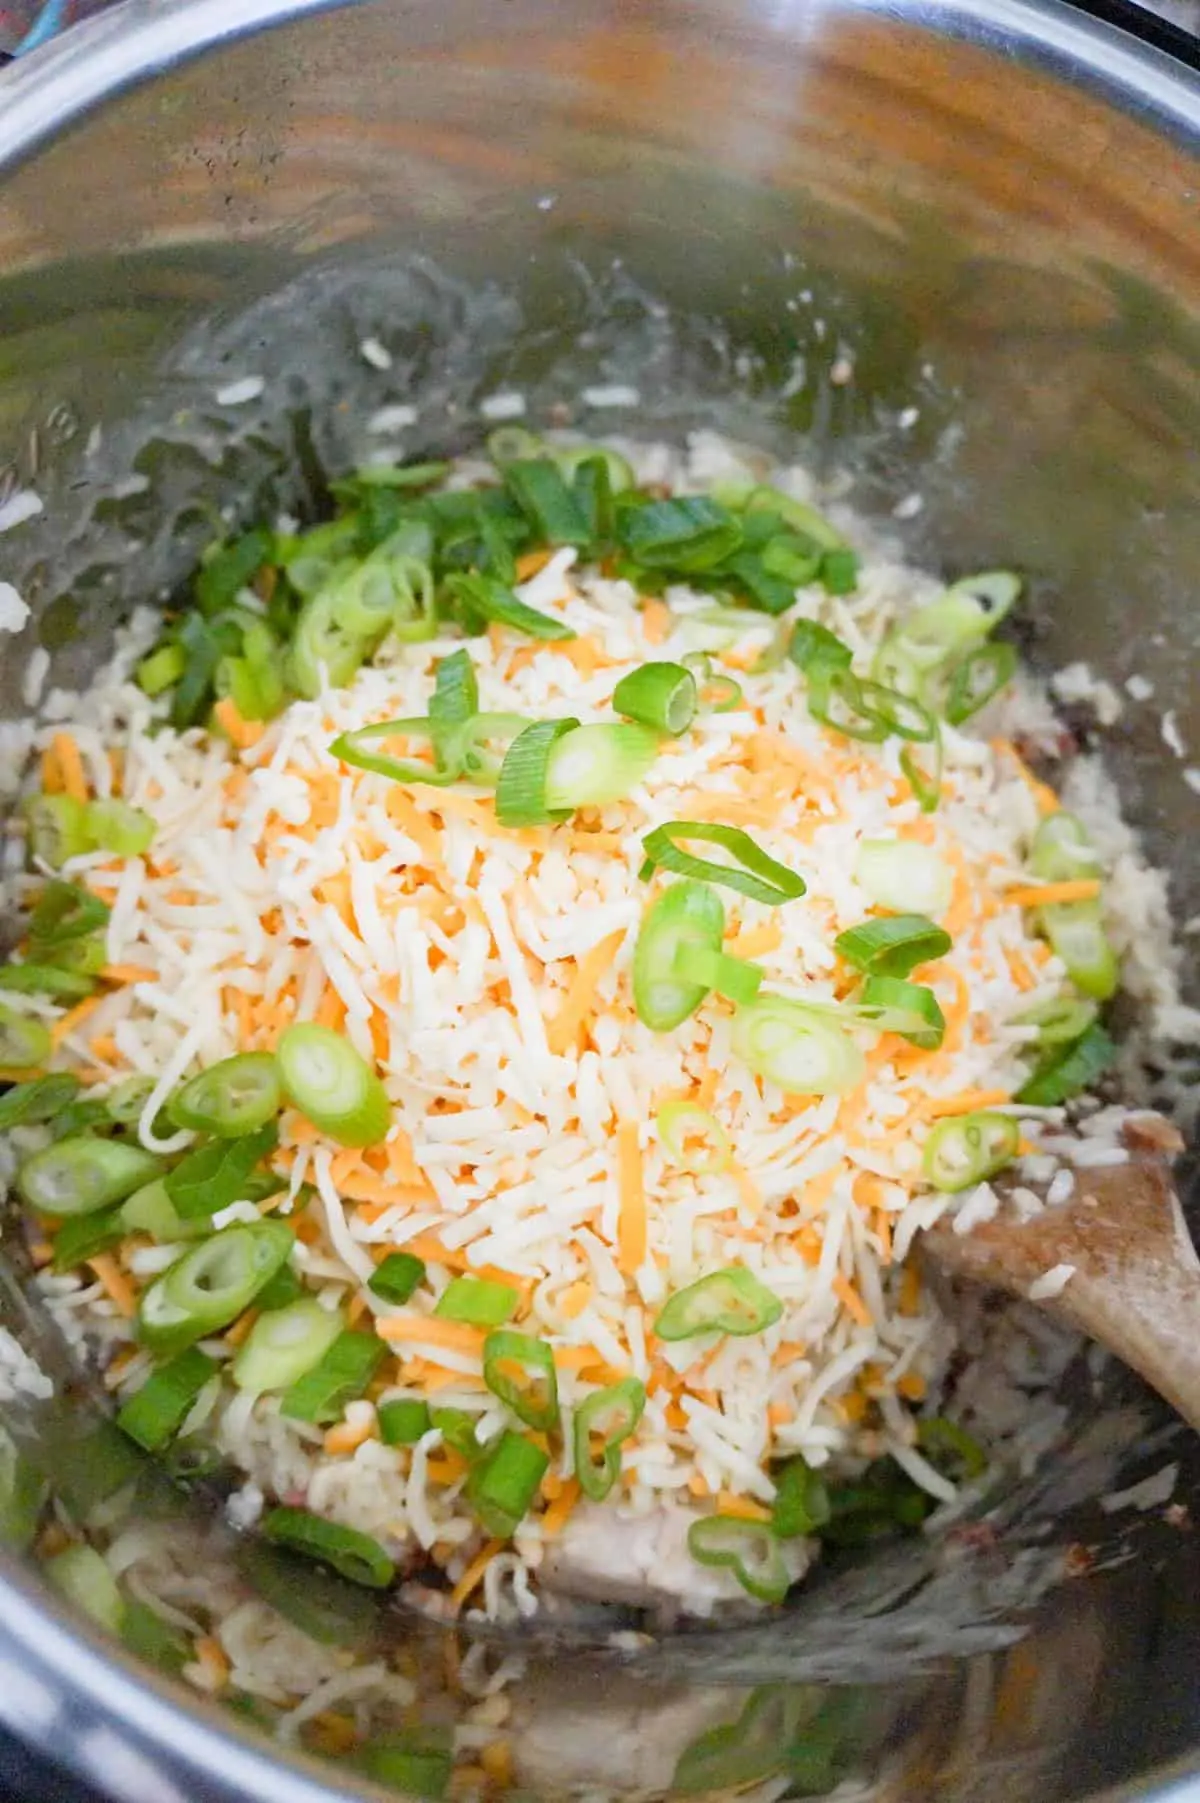 shredded cheddar cheese and chopped green onions on top of cooked chicken and rice in an Instant Pot